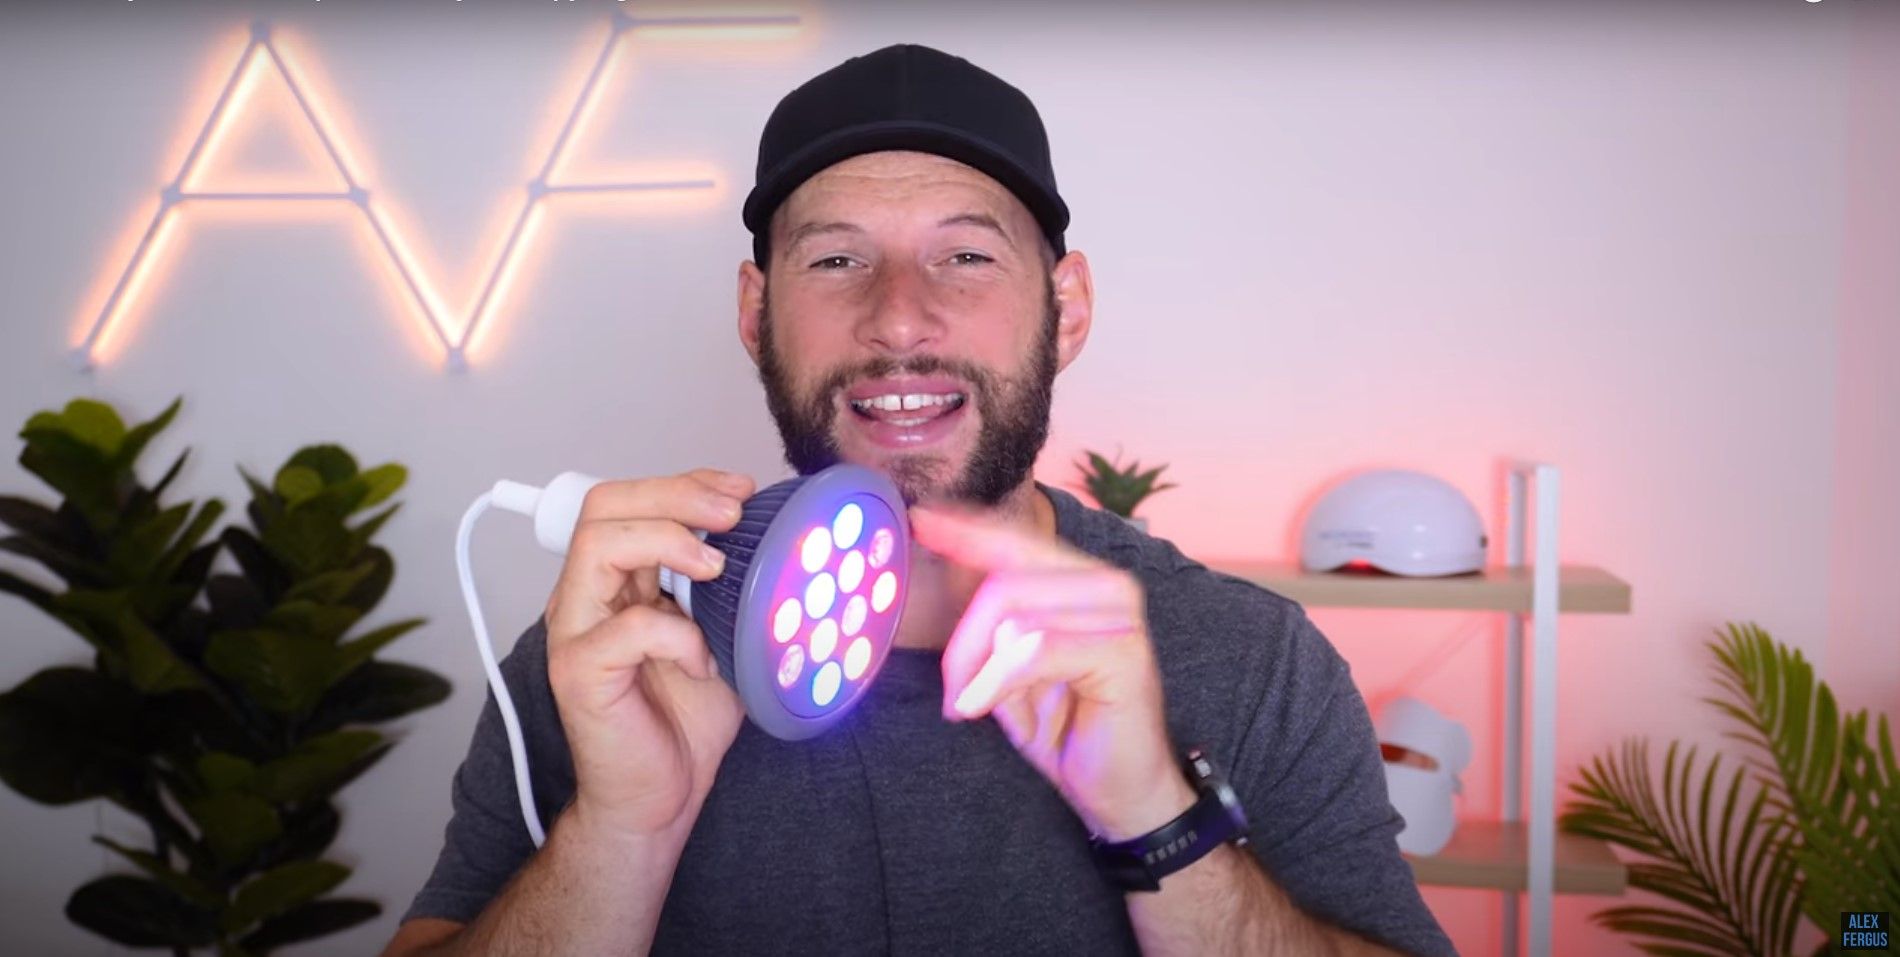 Alex holding a handheld beauty light therapy device